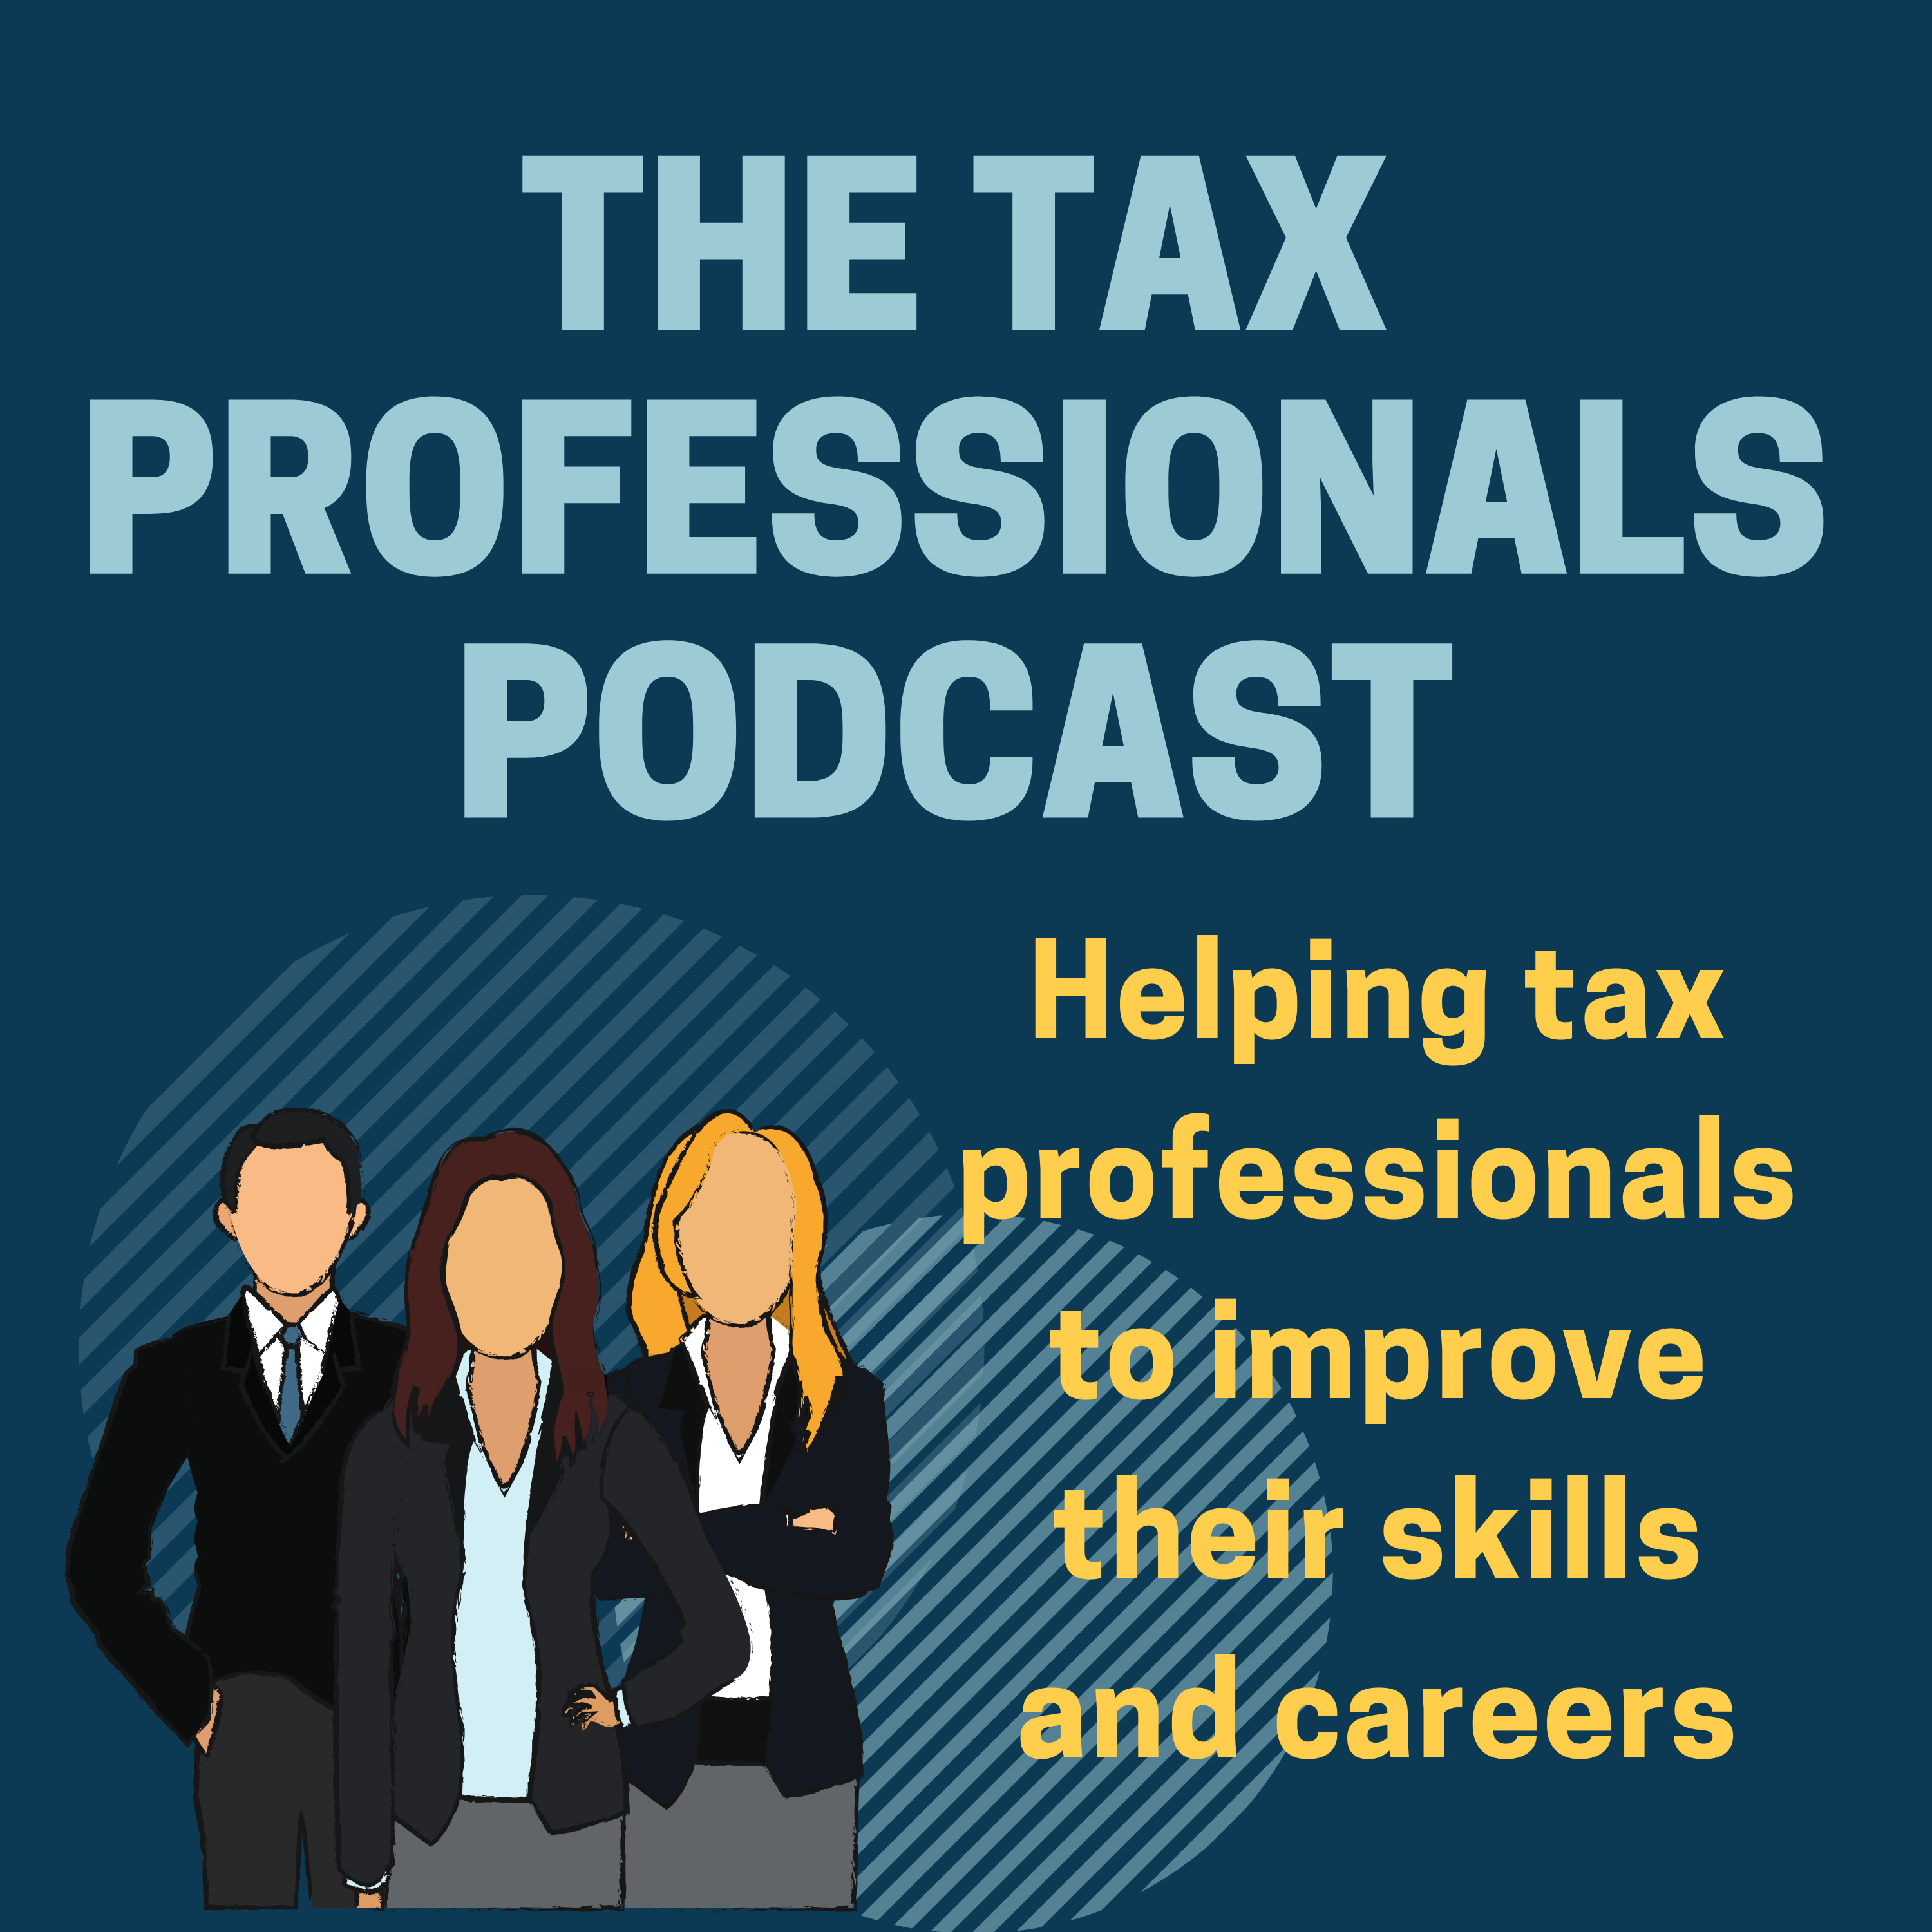 Welcome to The Tax Professionals Podcast